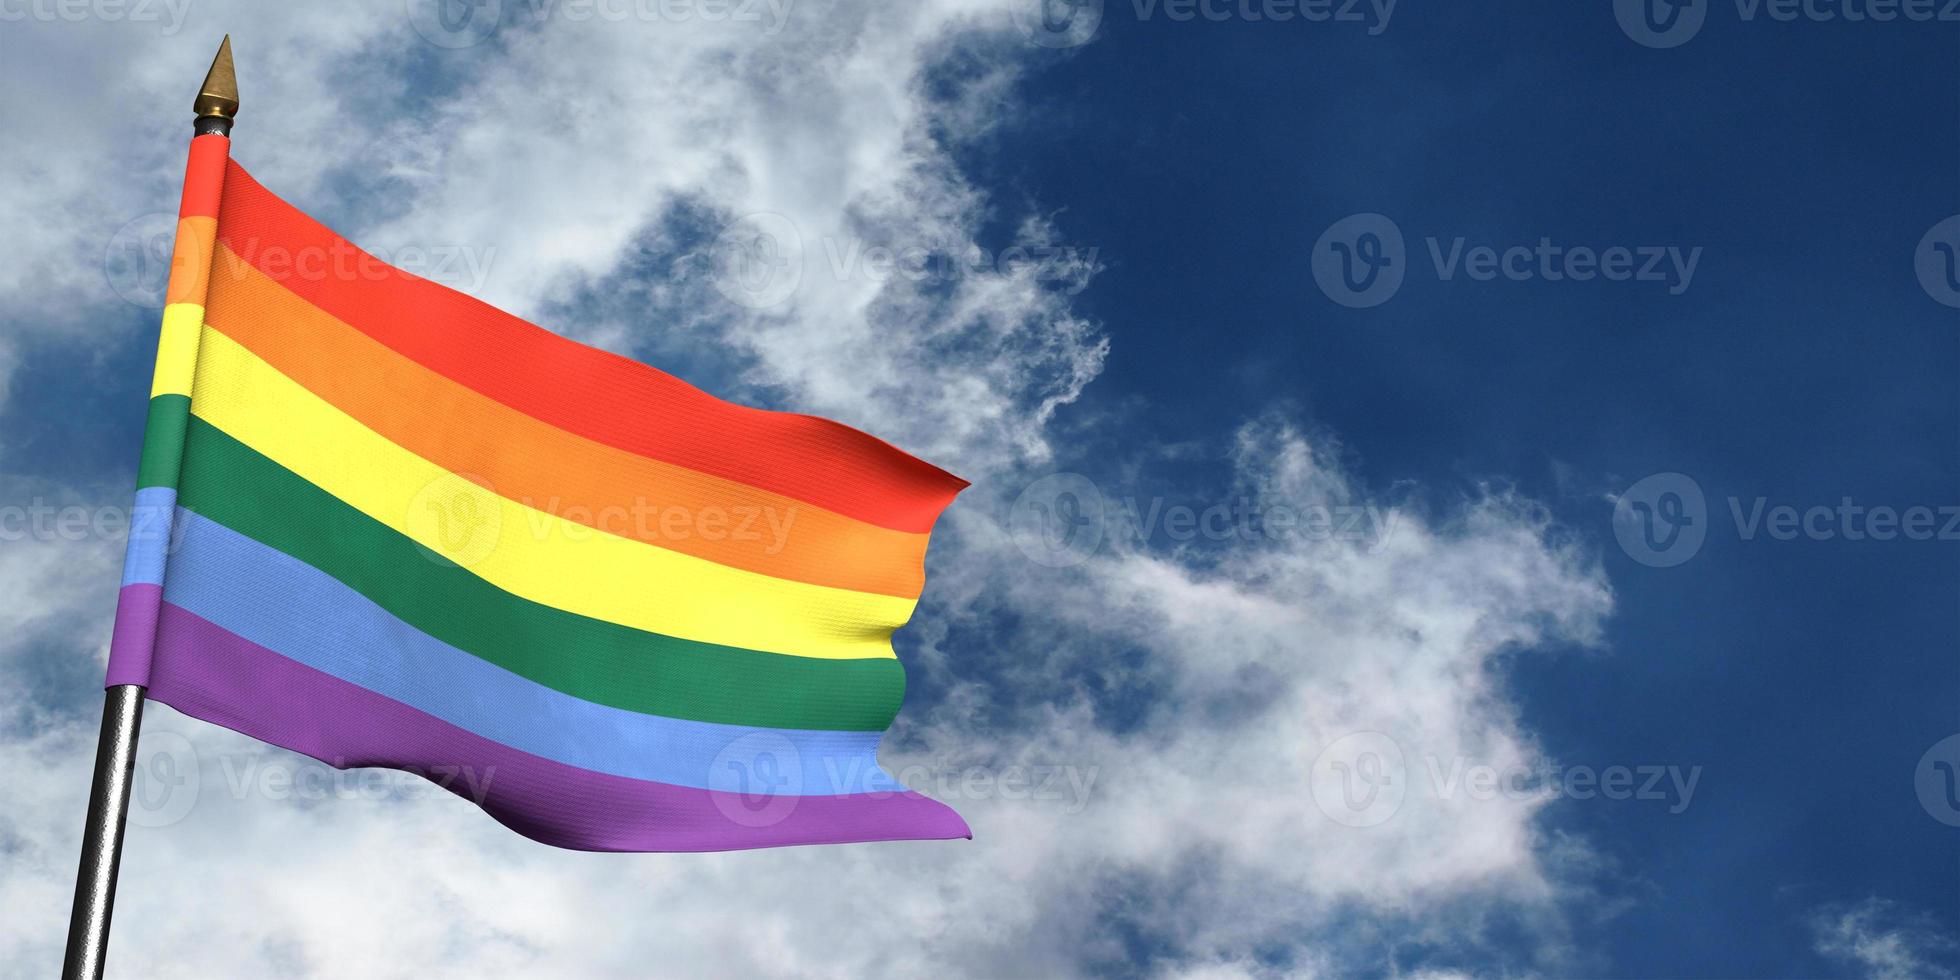 Gay lesbian lgbtq pride red orange yellow green blue violet purple pink colorful rainbow flag on the bluesky cloudy background wallpaper copyspace symbol homosexuality freedom relation.3d render photo